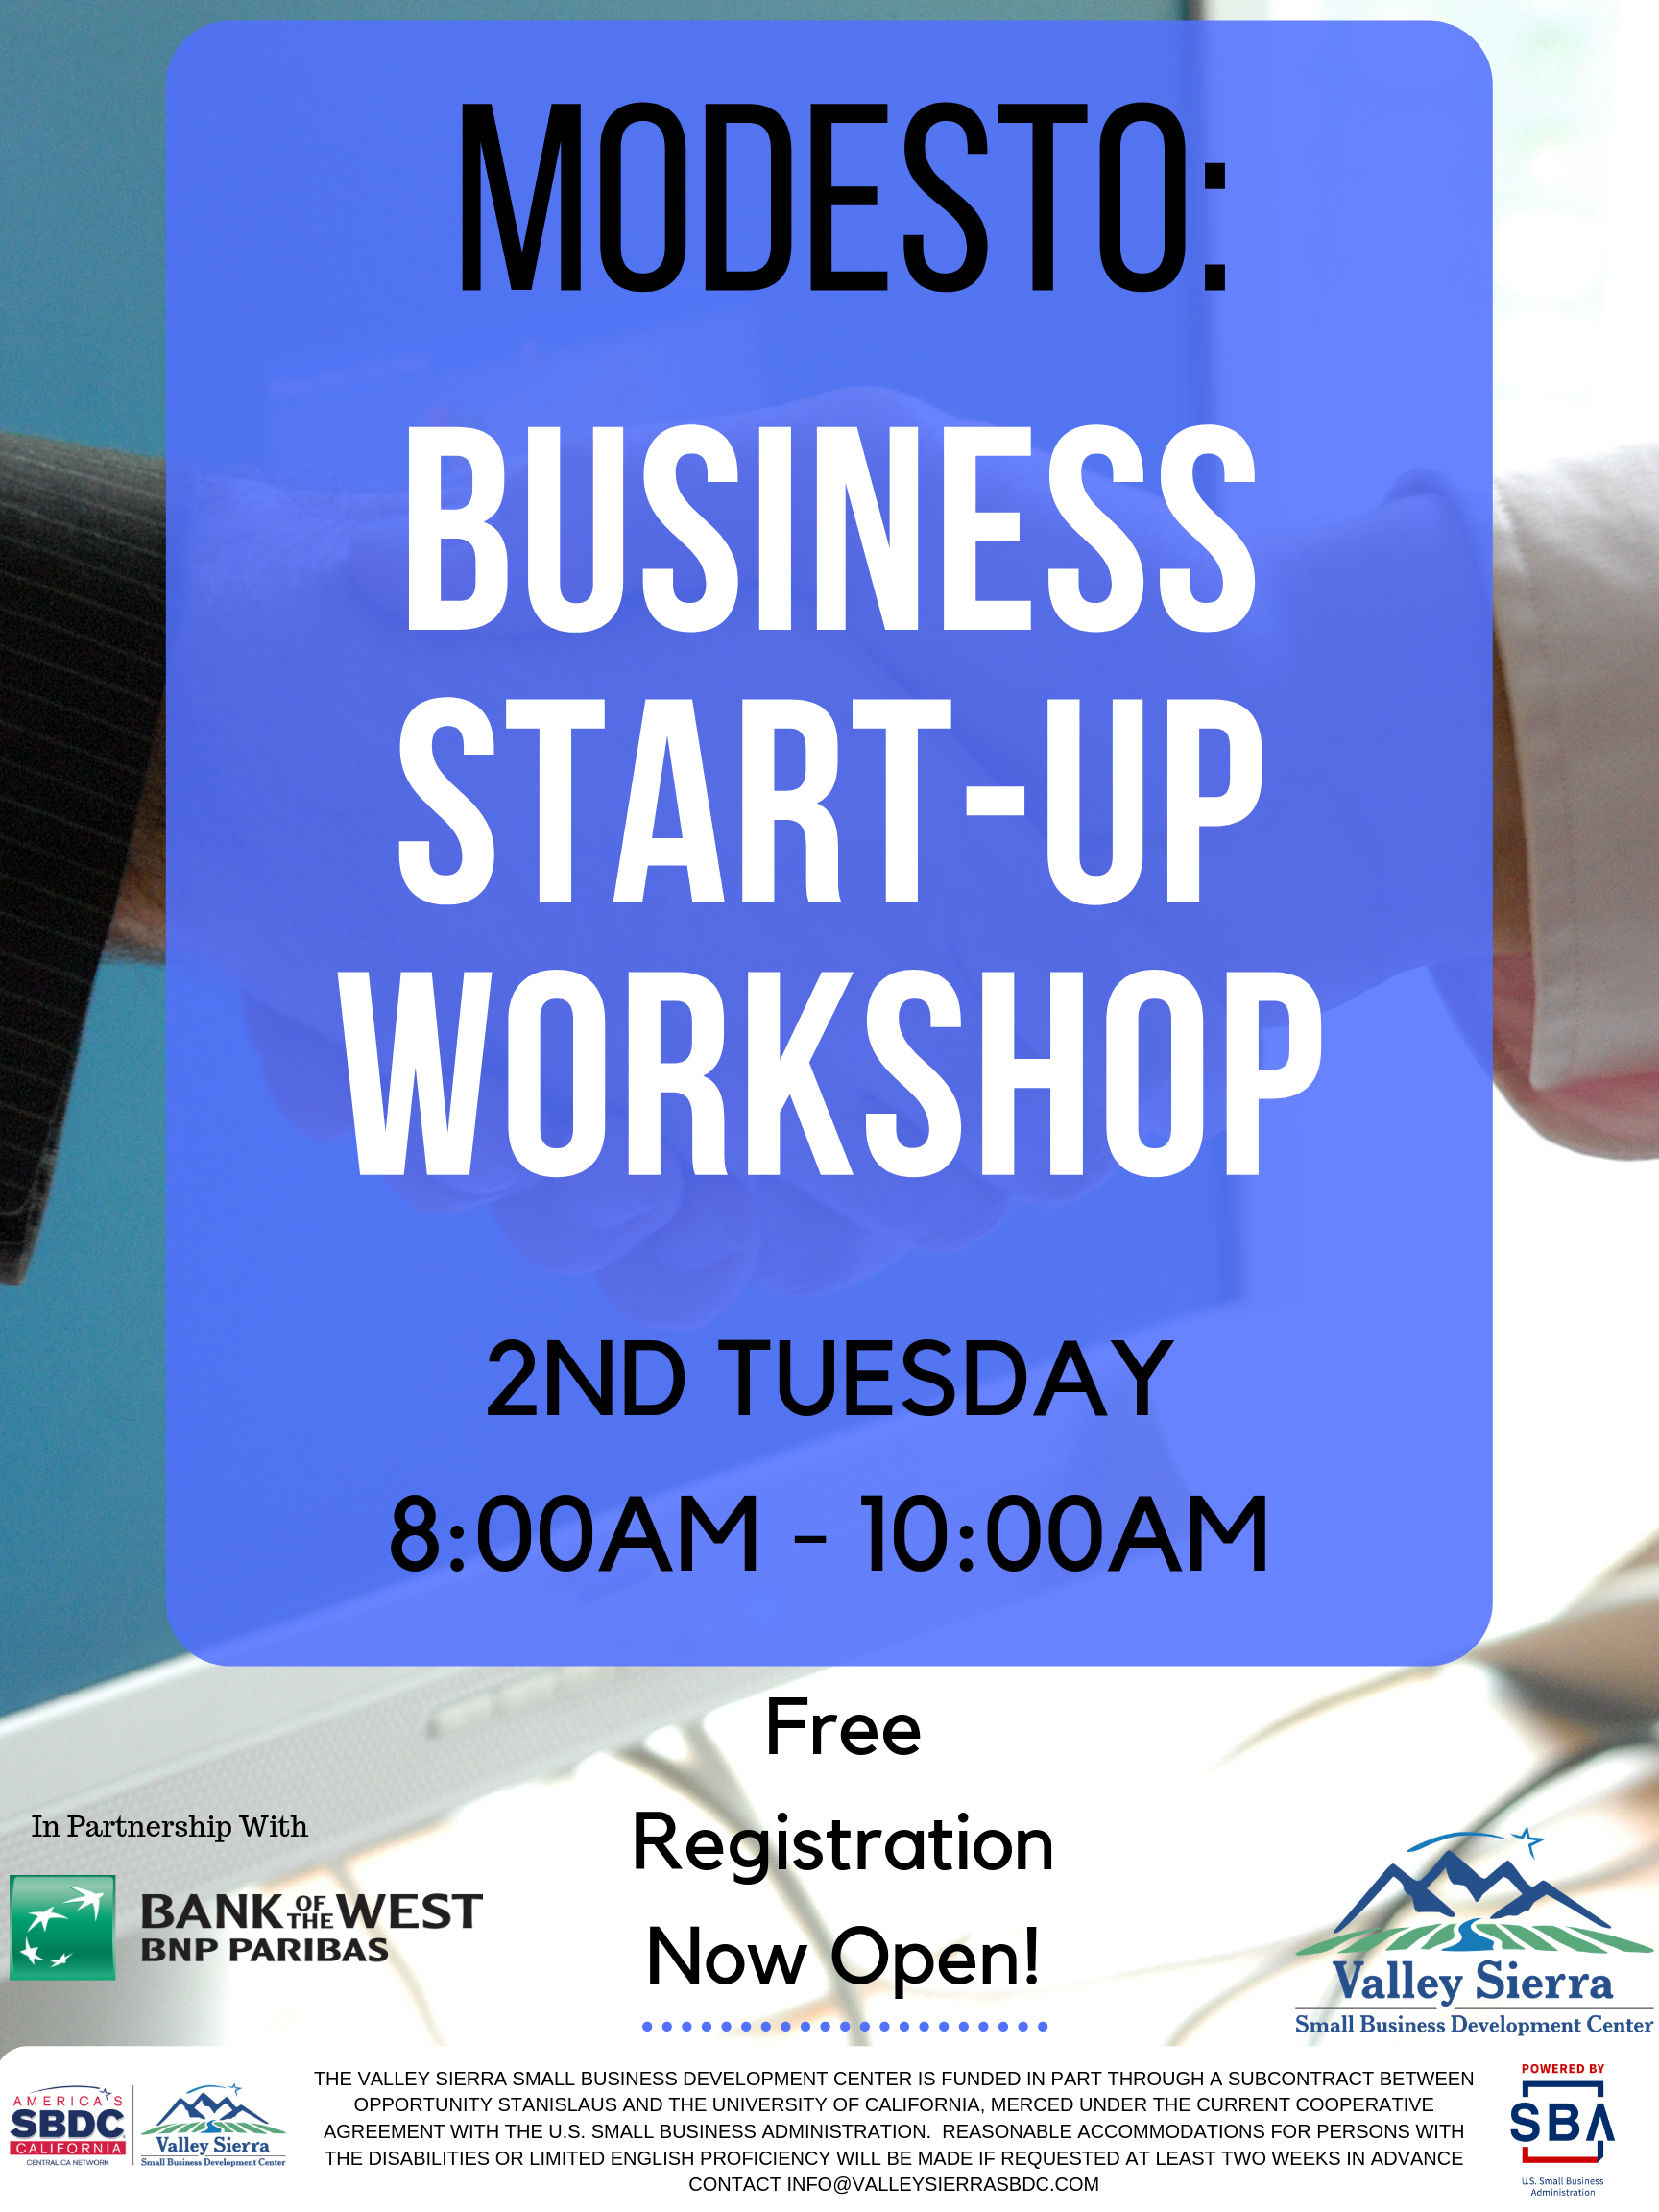 Event Flyer, Modesto: Business Start-Up Workshop, 2nd Tuesday, 8:00am - 10:00am. Free Registration Now Open! Tuesday, December 10th, 2019 at the Valley Sierra SBDC. 1625 I Street, Modesto, Ca.